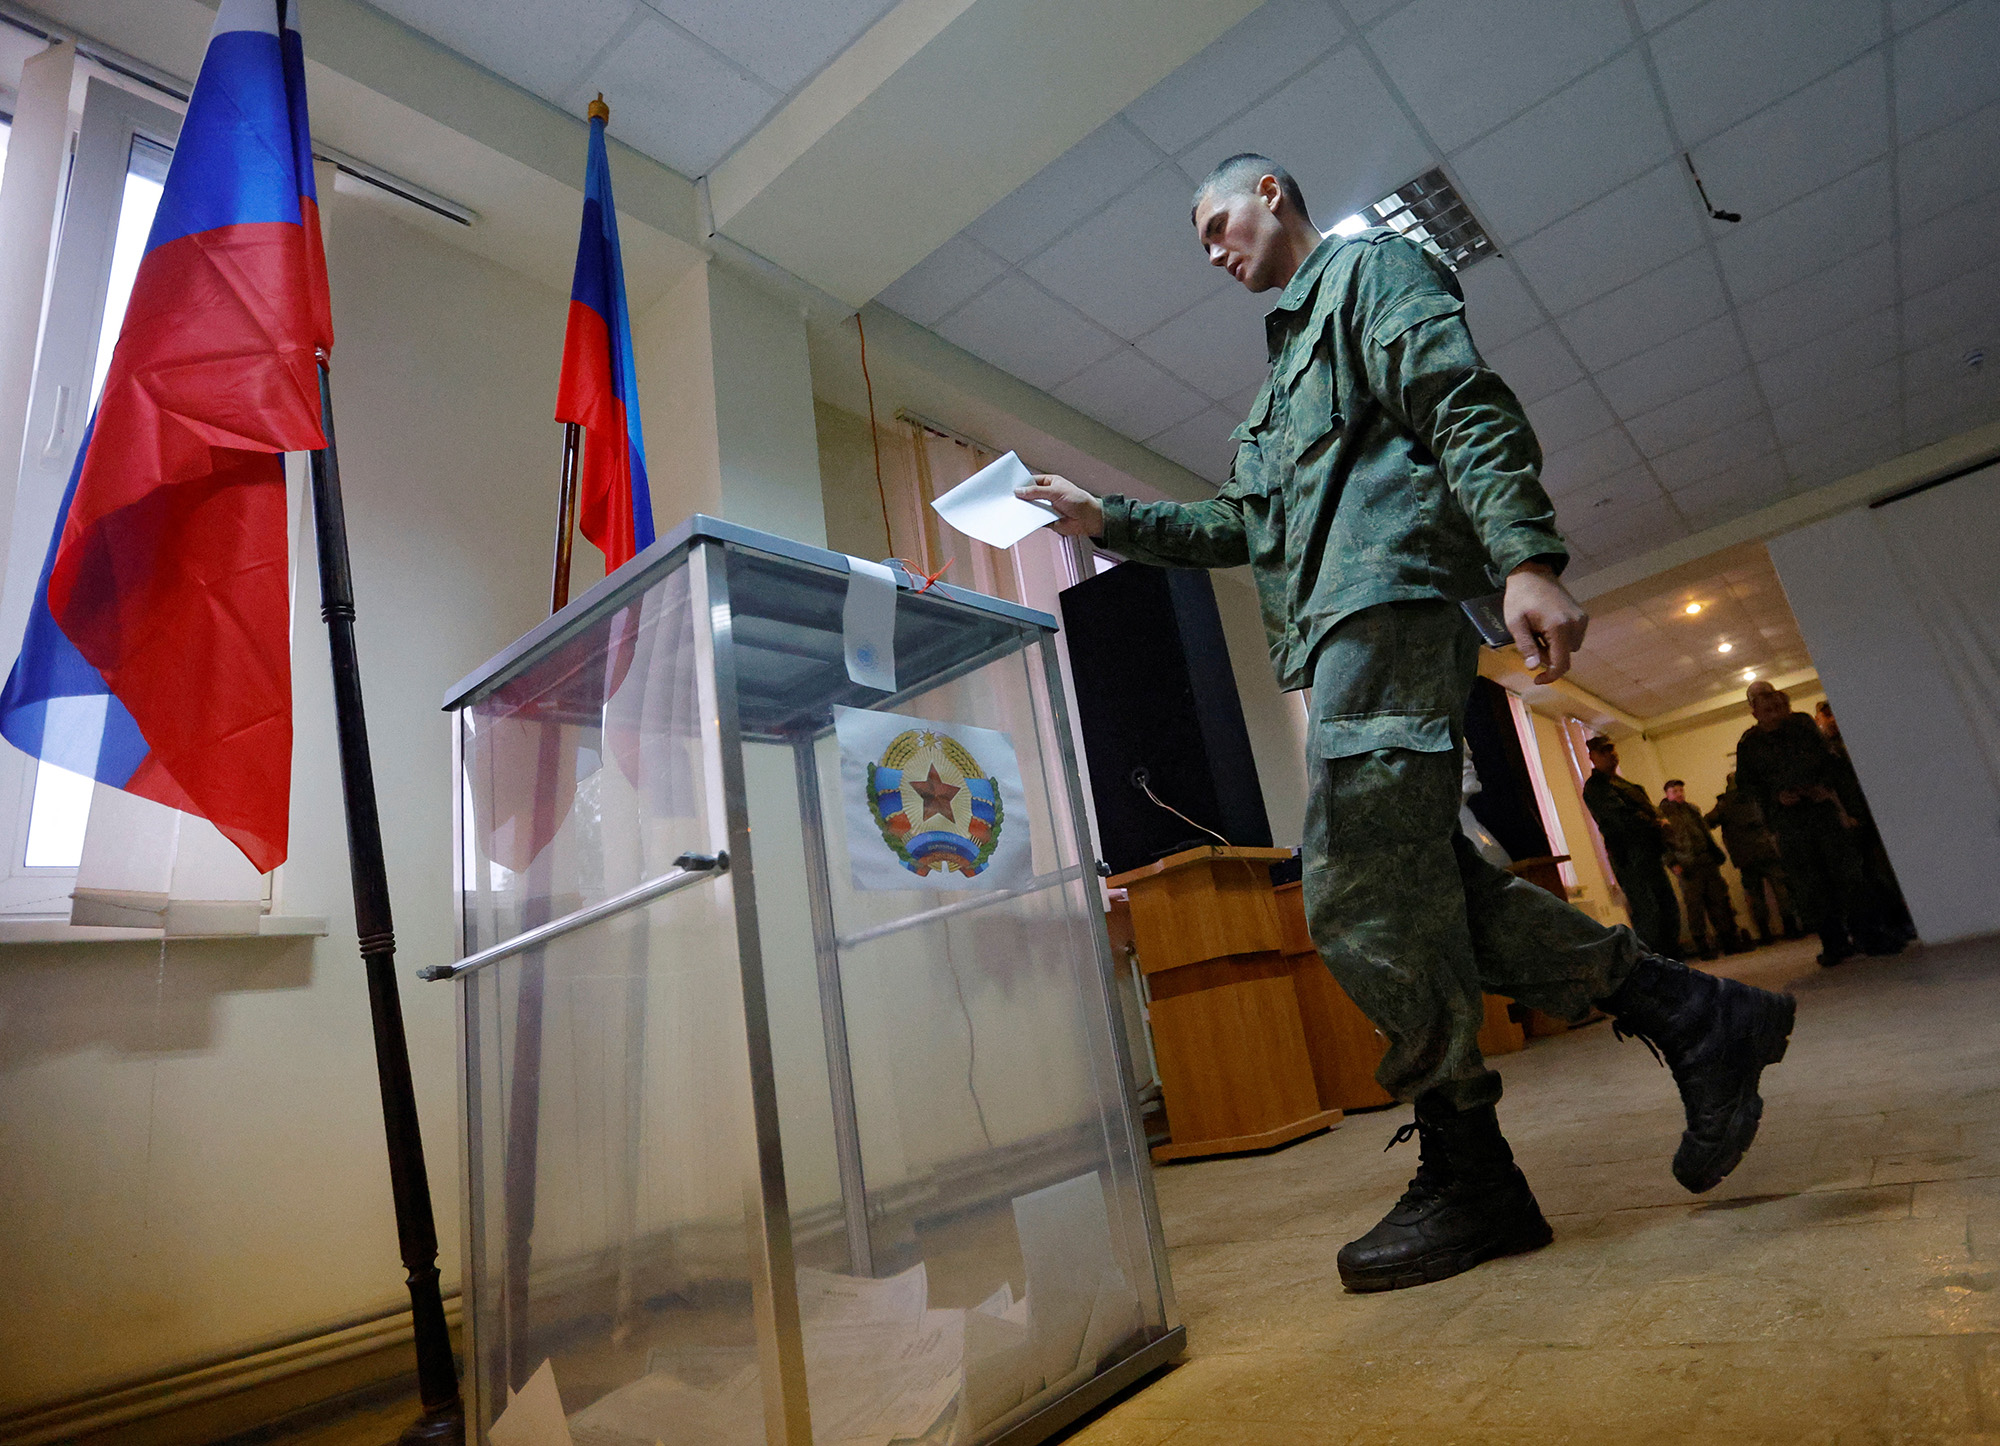 A service member of the self-proclaimed Luhansk People's Republic (LPR) votes during a referendum on joining LPR to Russia, at a military unit in Luhansk, Ukraine, on September 23.